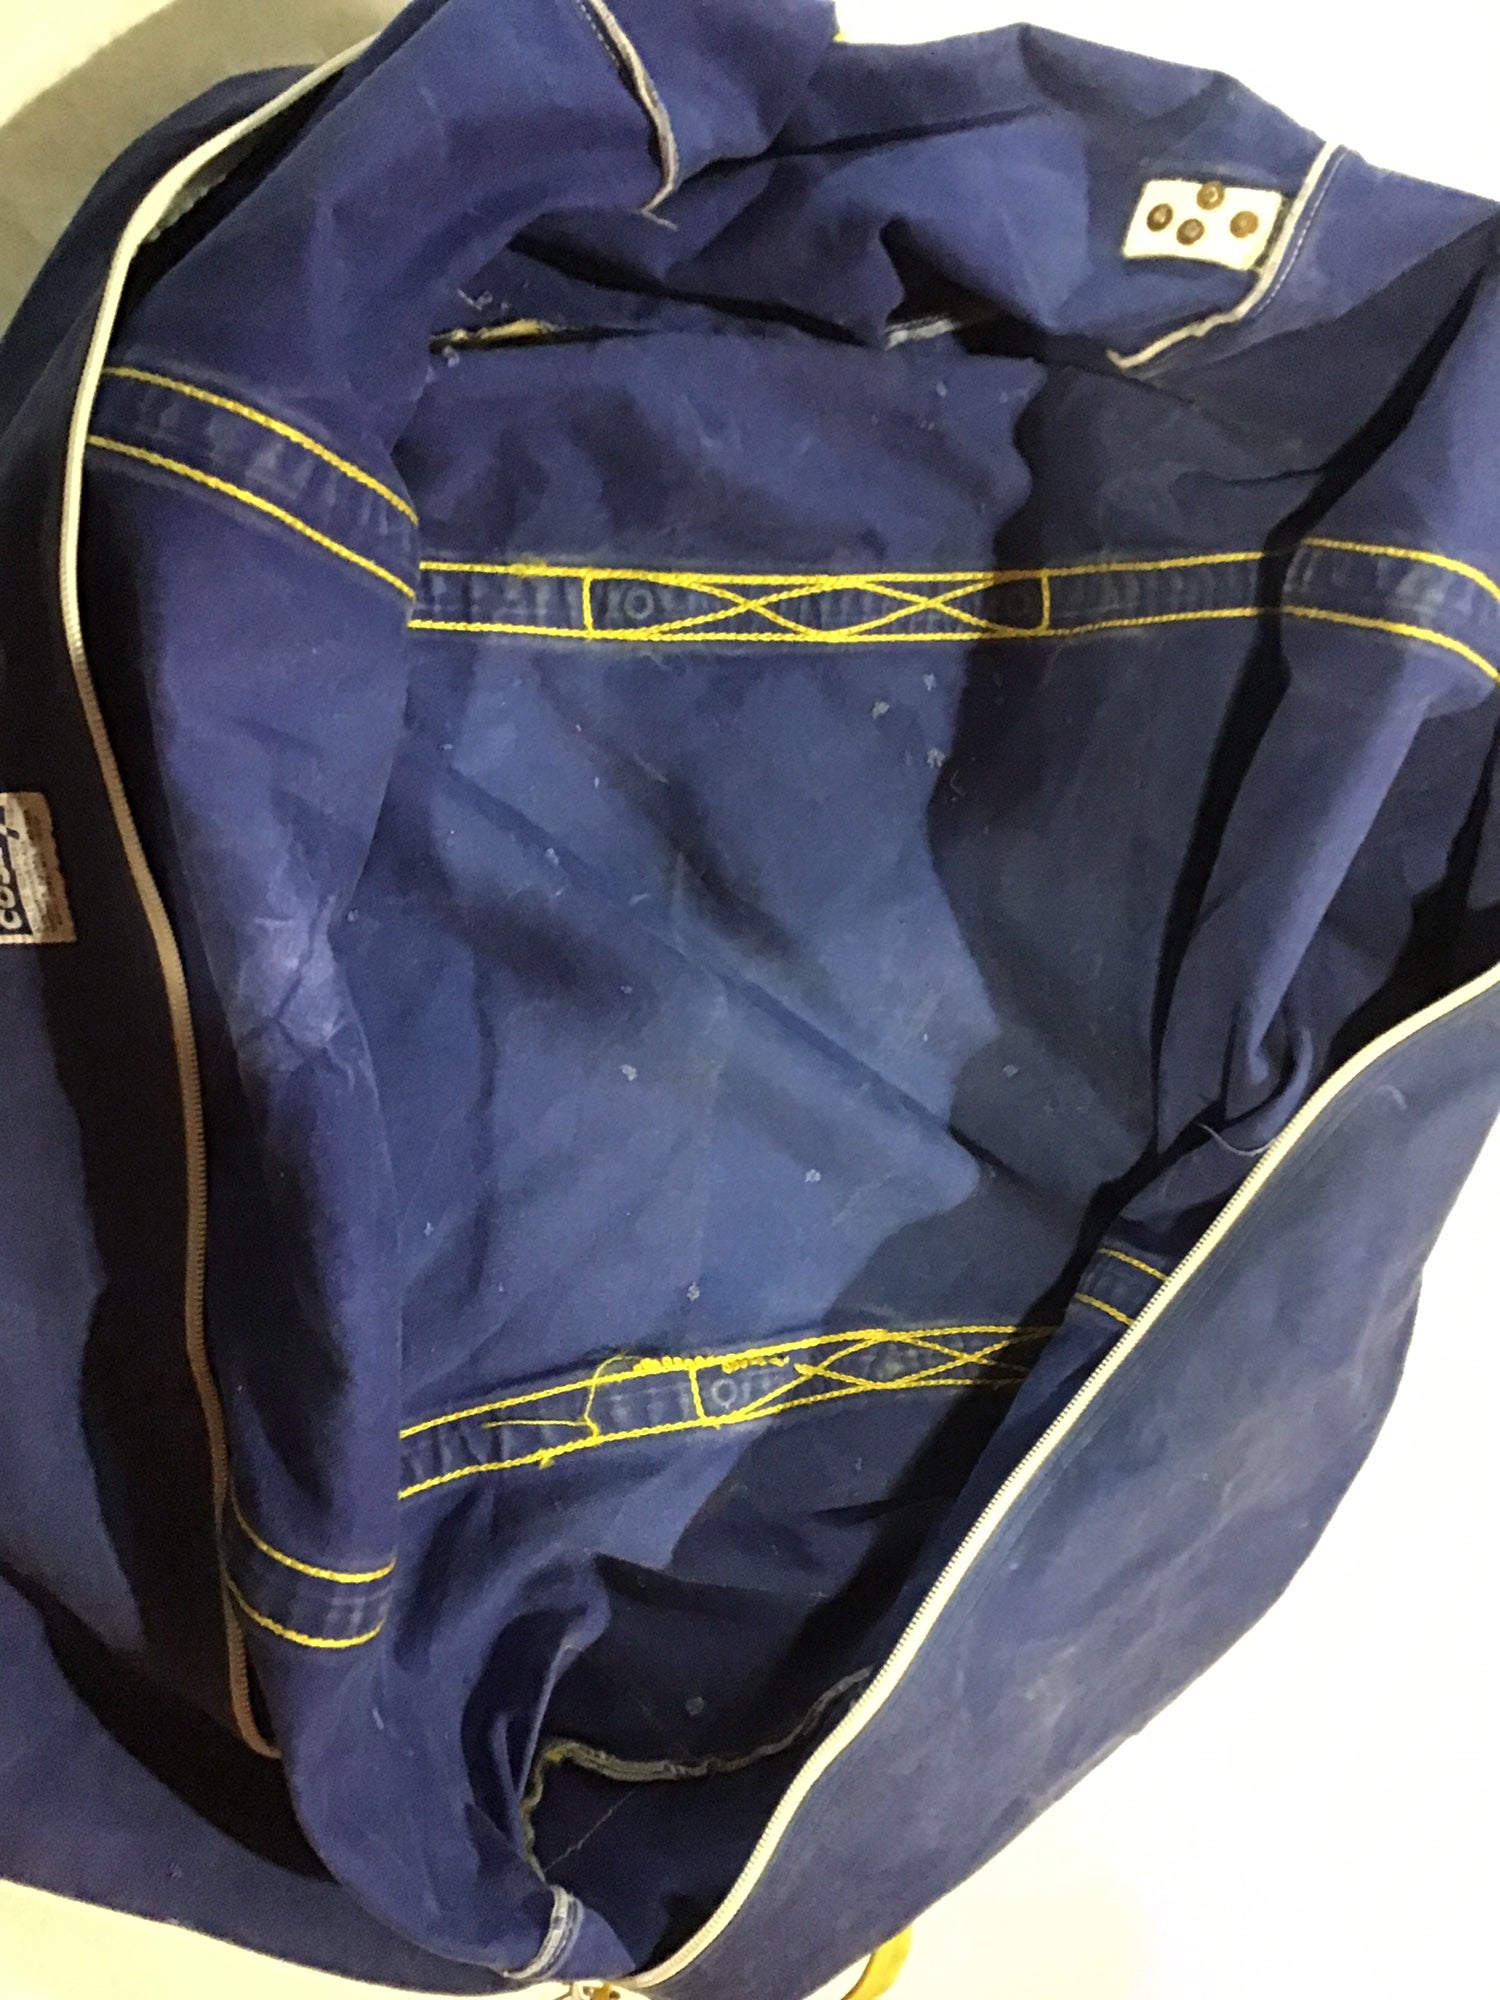 Used Blue St. Louis Blues Player Carry Bag